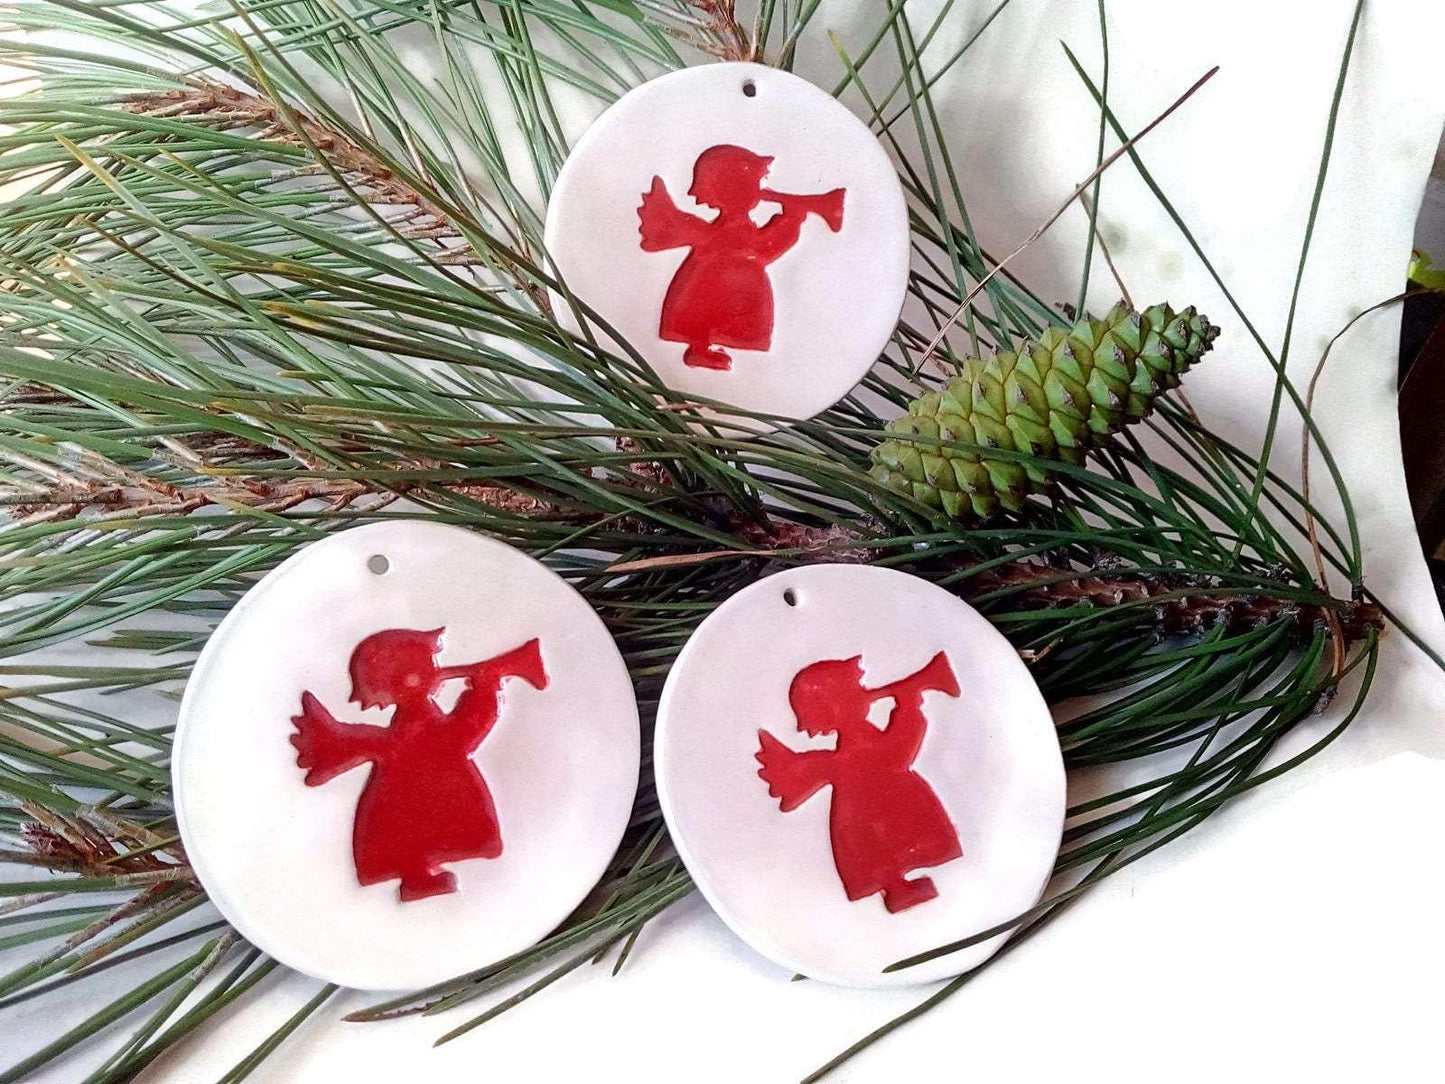 1Pc Handmade Ceramic Red and White Angel Wall Hanging, Round Christmas Tree Ornaments, Christian Wall Art, Pottery Nursery Wall Art